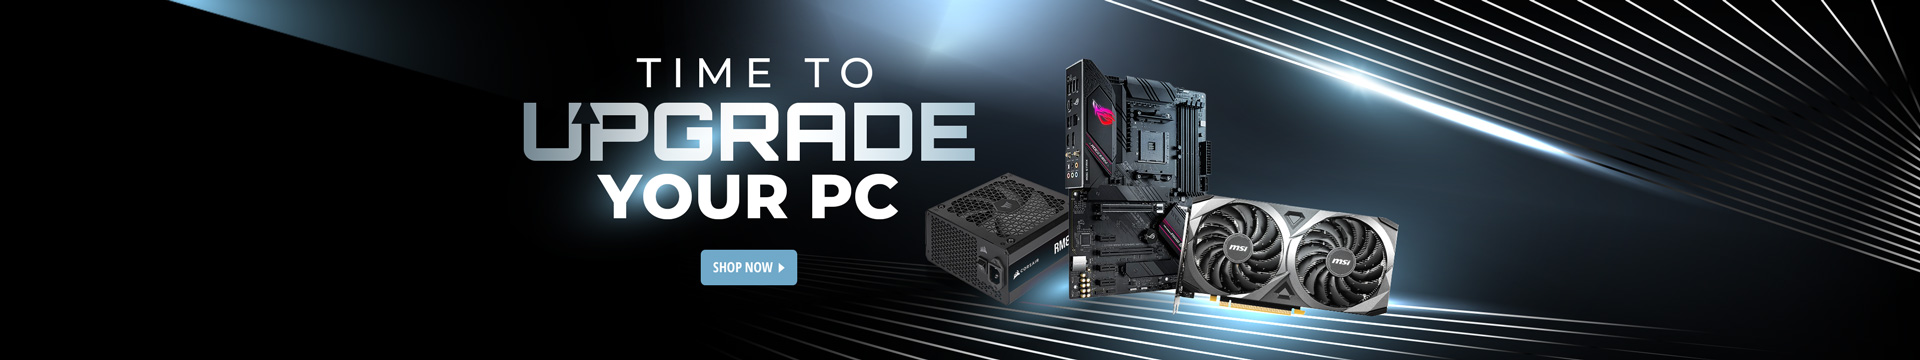 Time to Upgrade Your PC